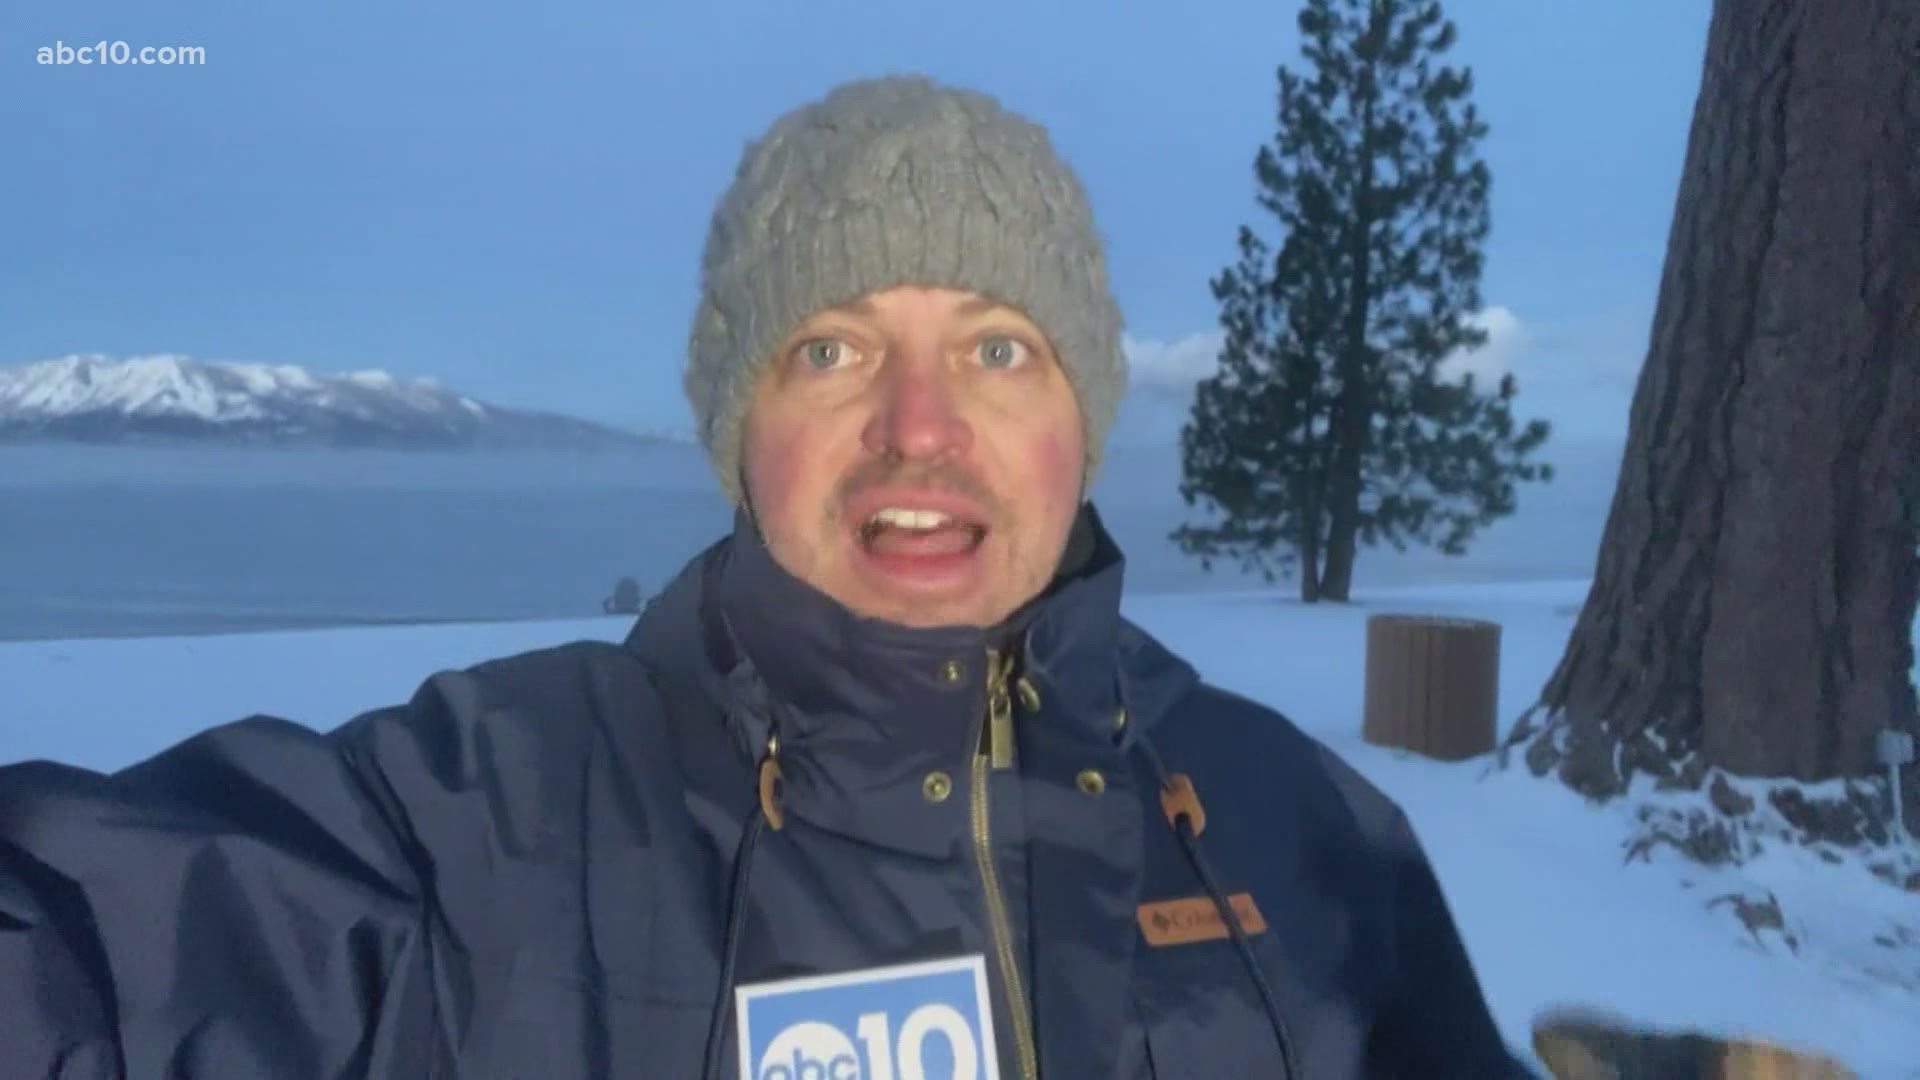 Rob Carlmark reporting from South Lake Tahoe says an avalanche watch is in effect from Tuesday evening through Friday morning.